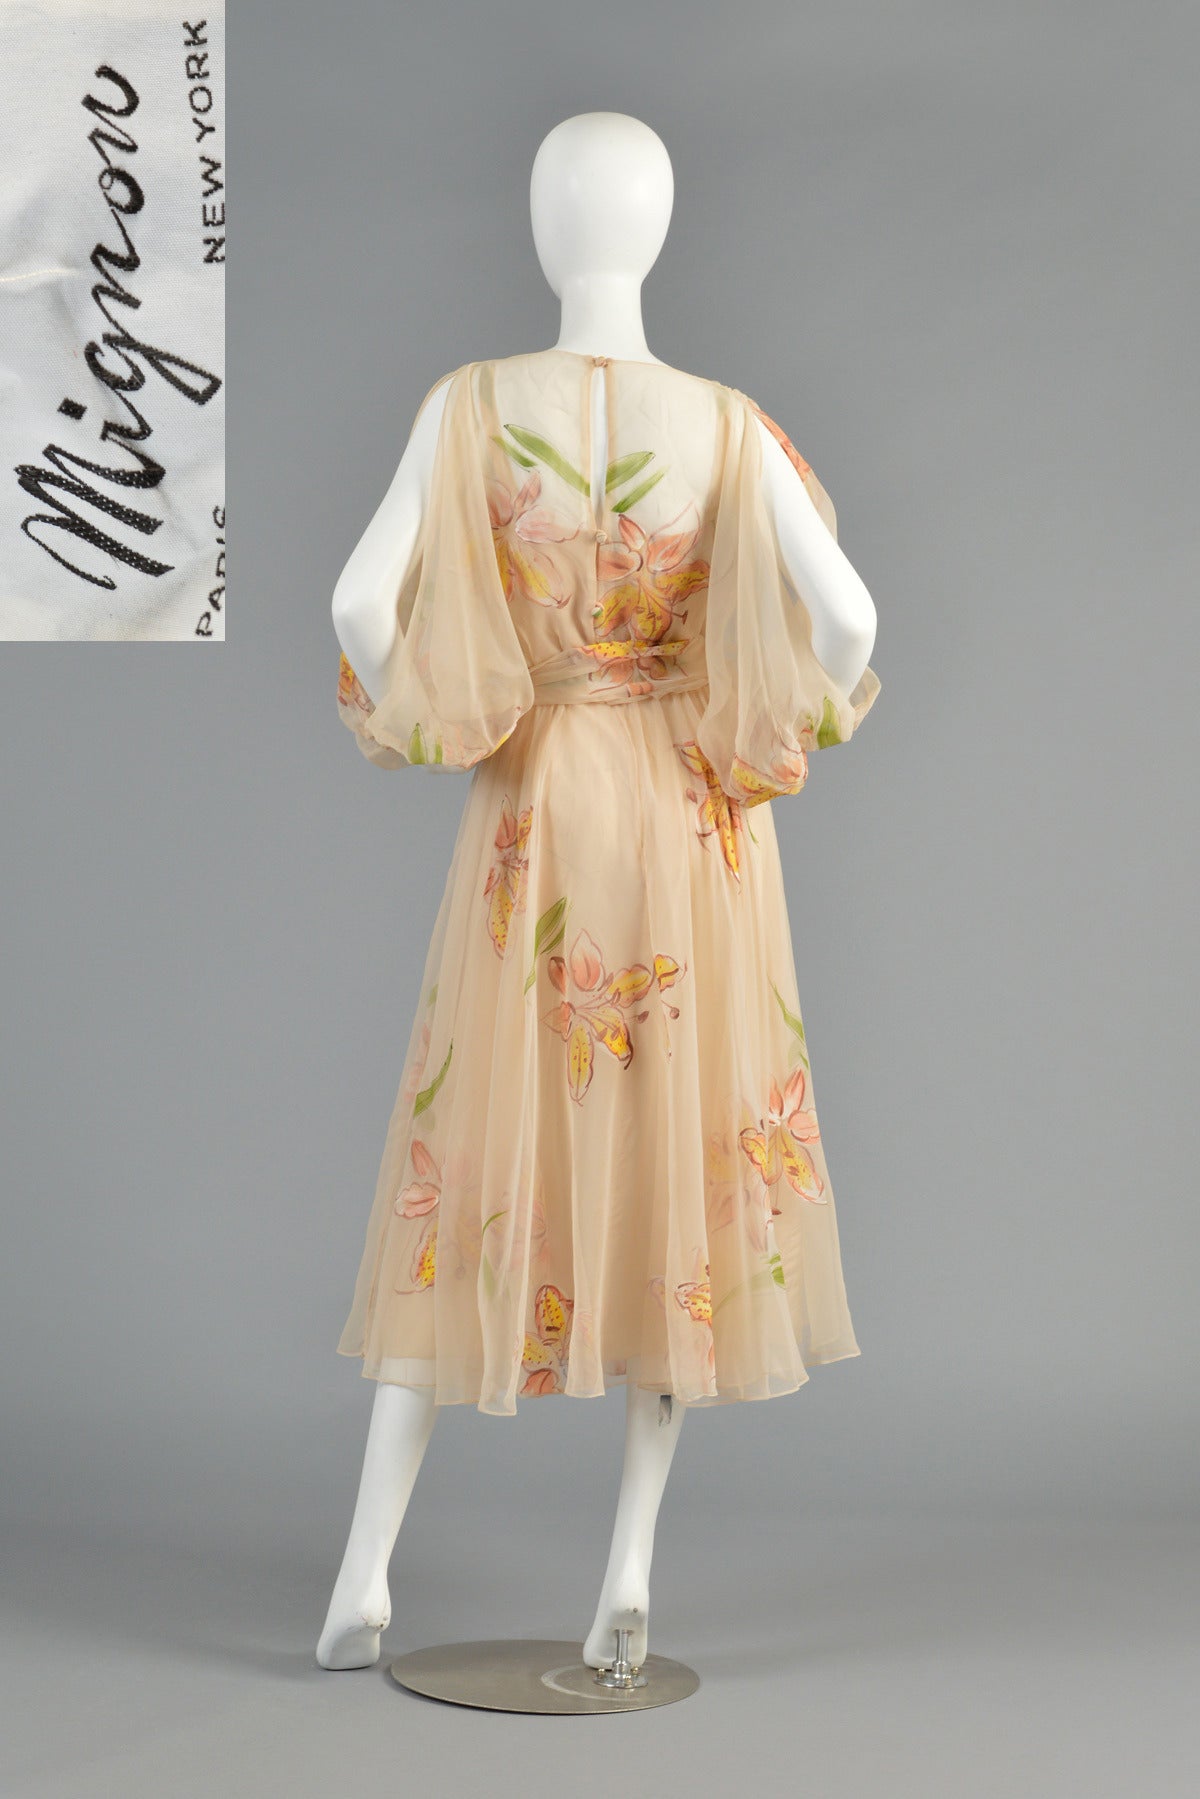 Mignon 1970's Hand Painted Floral Chiffon Dress with Open Sleeves 5